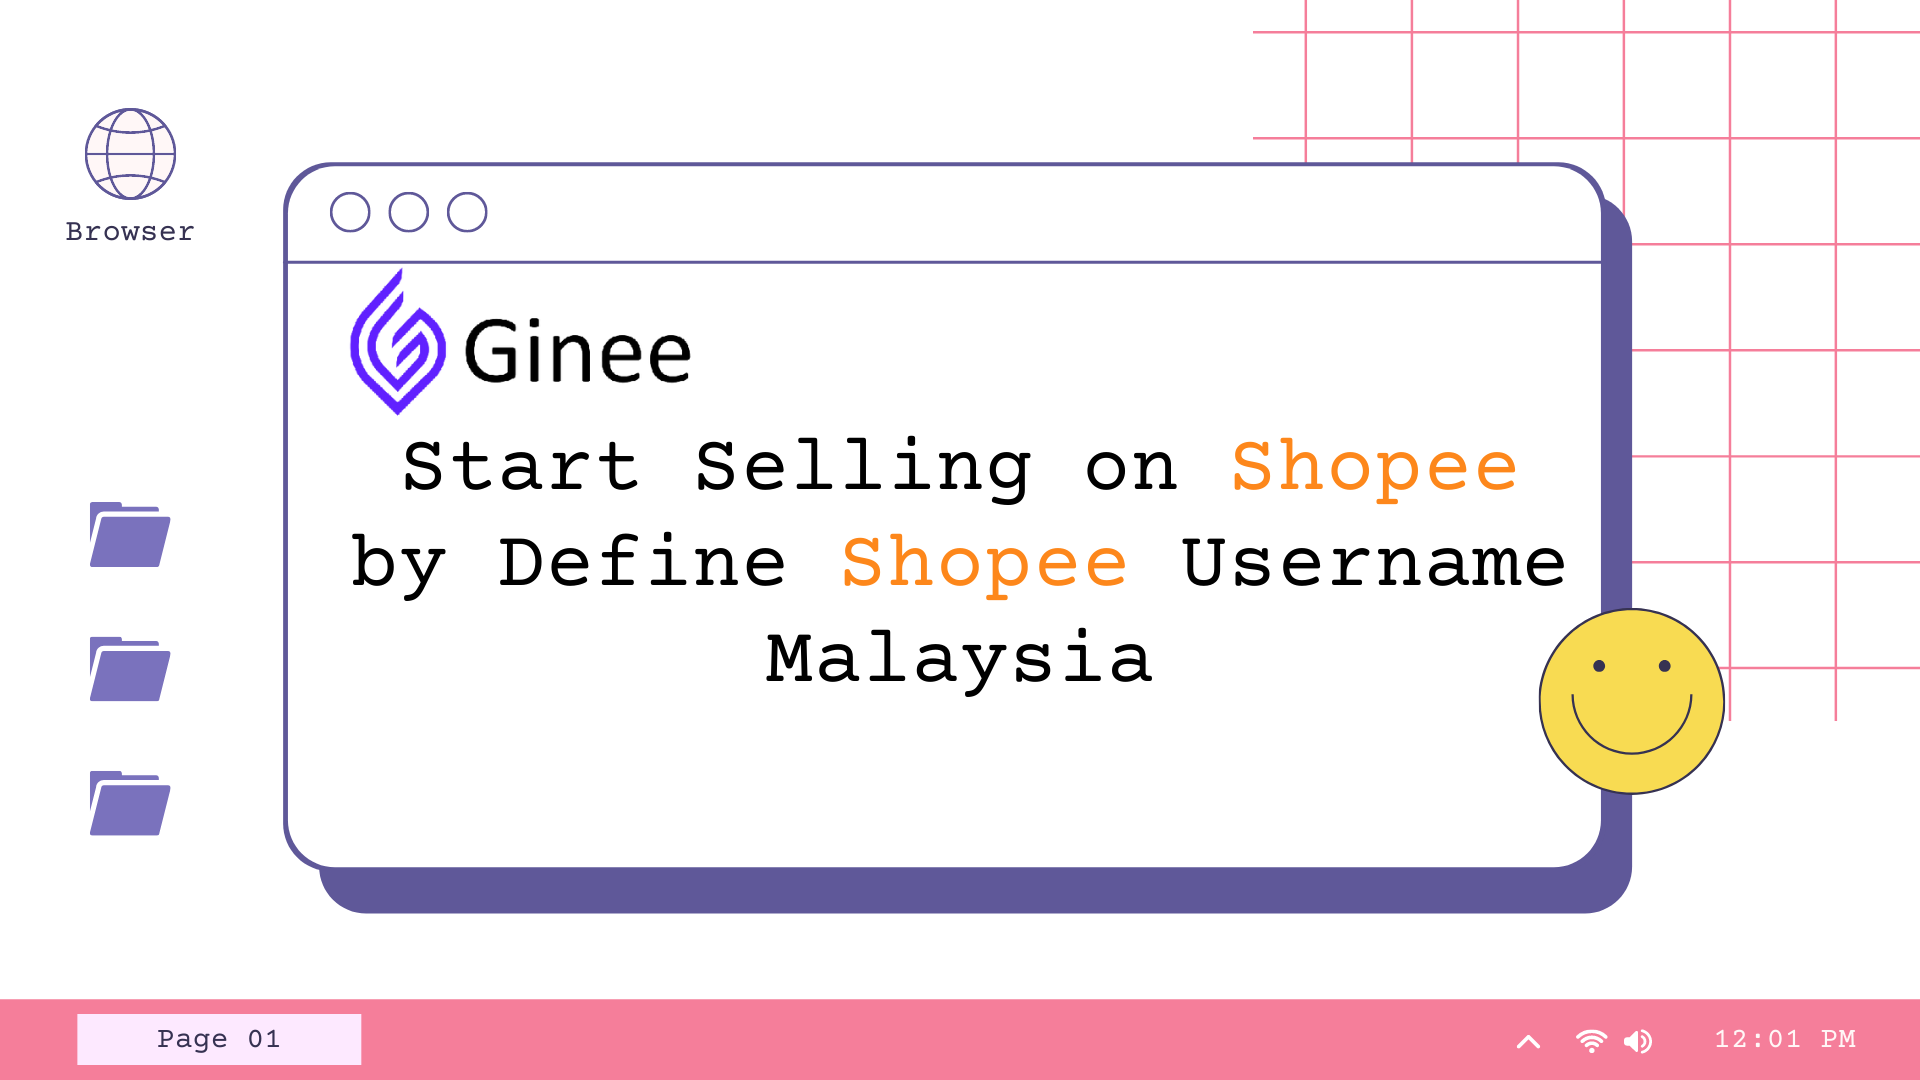 https://cdn-oss.ginee.com/official/wp-content/uploads/2021/09/Start-Selling-on-Shopee-by-Define-Shopee-Username-Malaysia.png